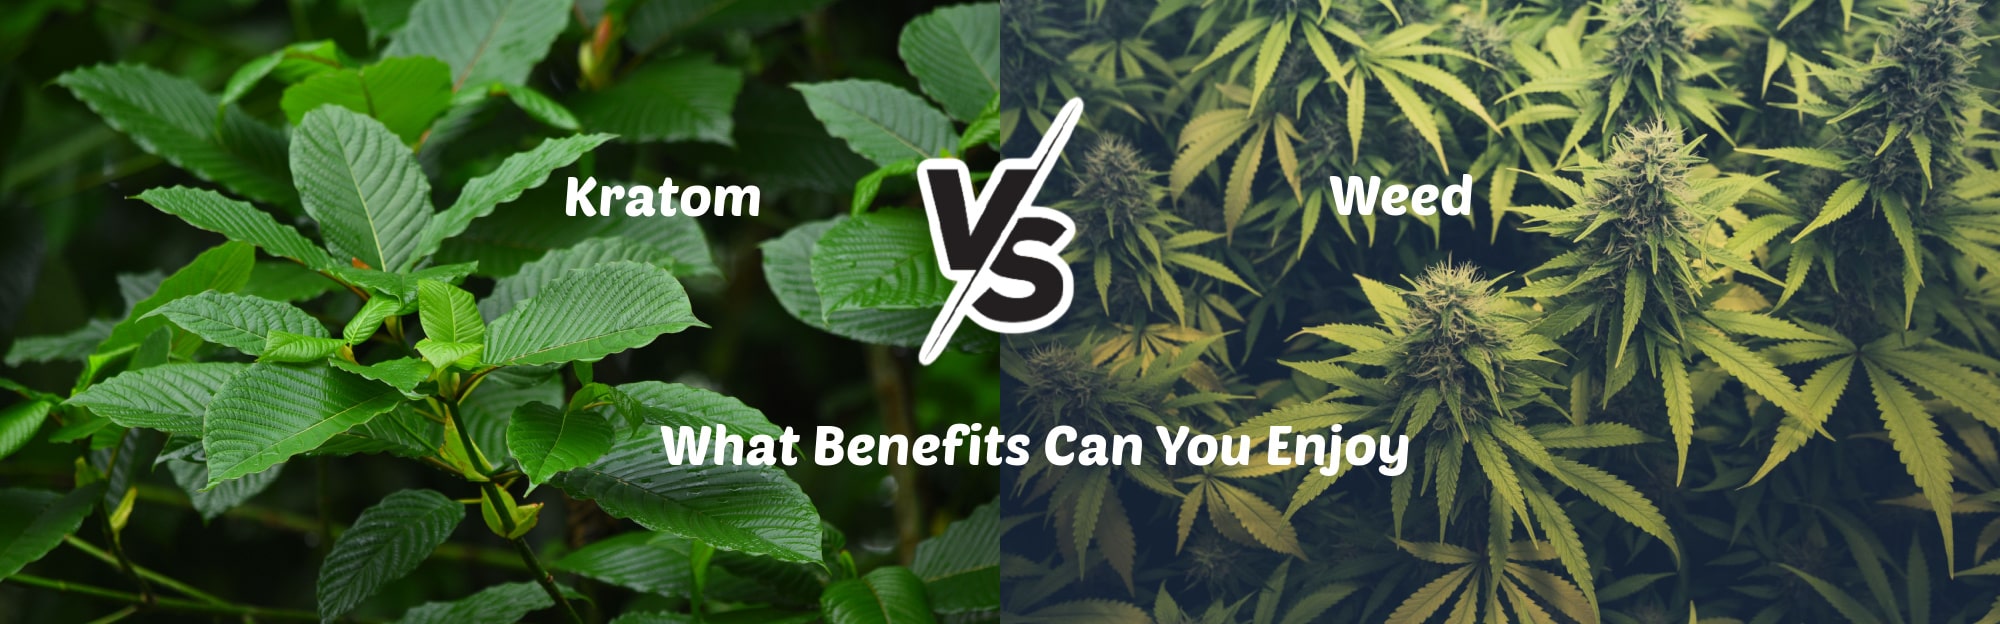 image of kratom vs weed what benefit can you enjoy